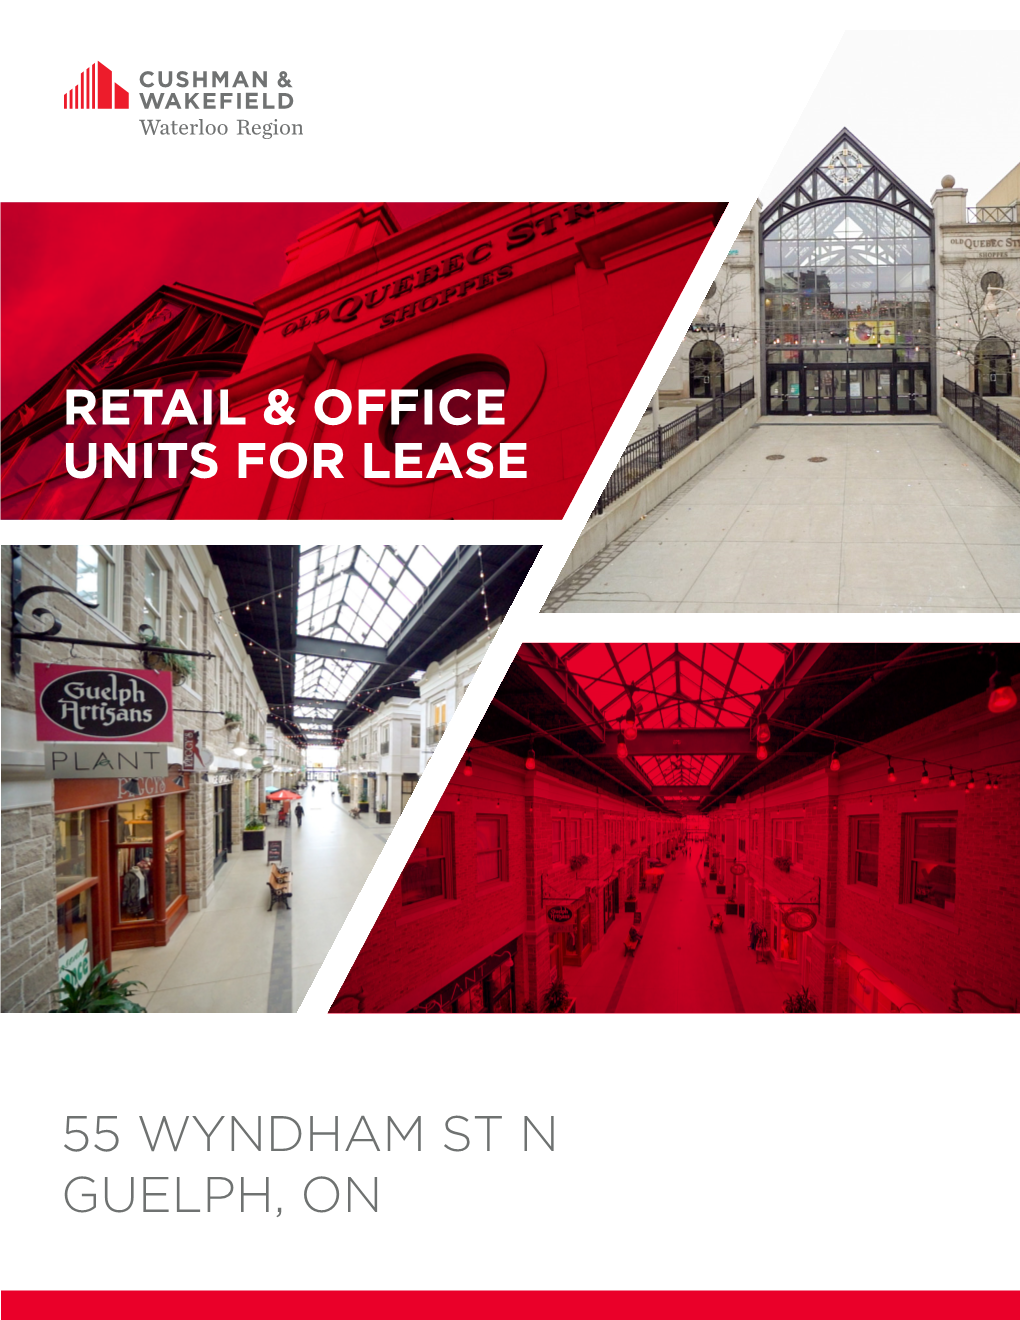 55 Wyndham St N Guelph, on Retail & Office Units For